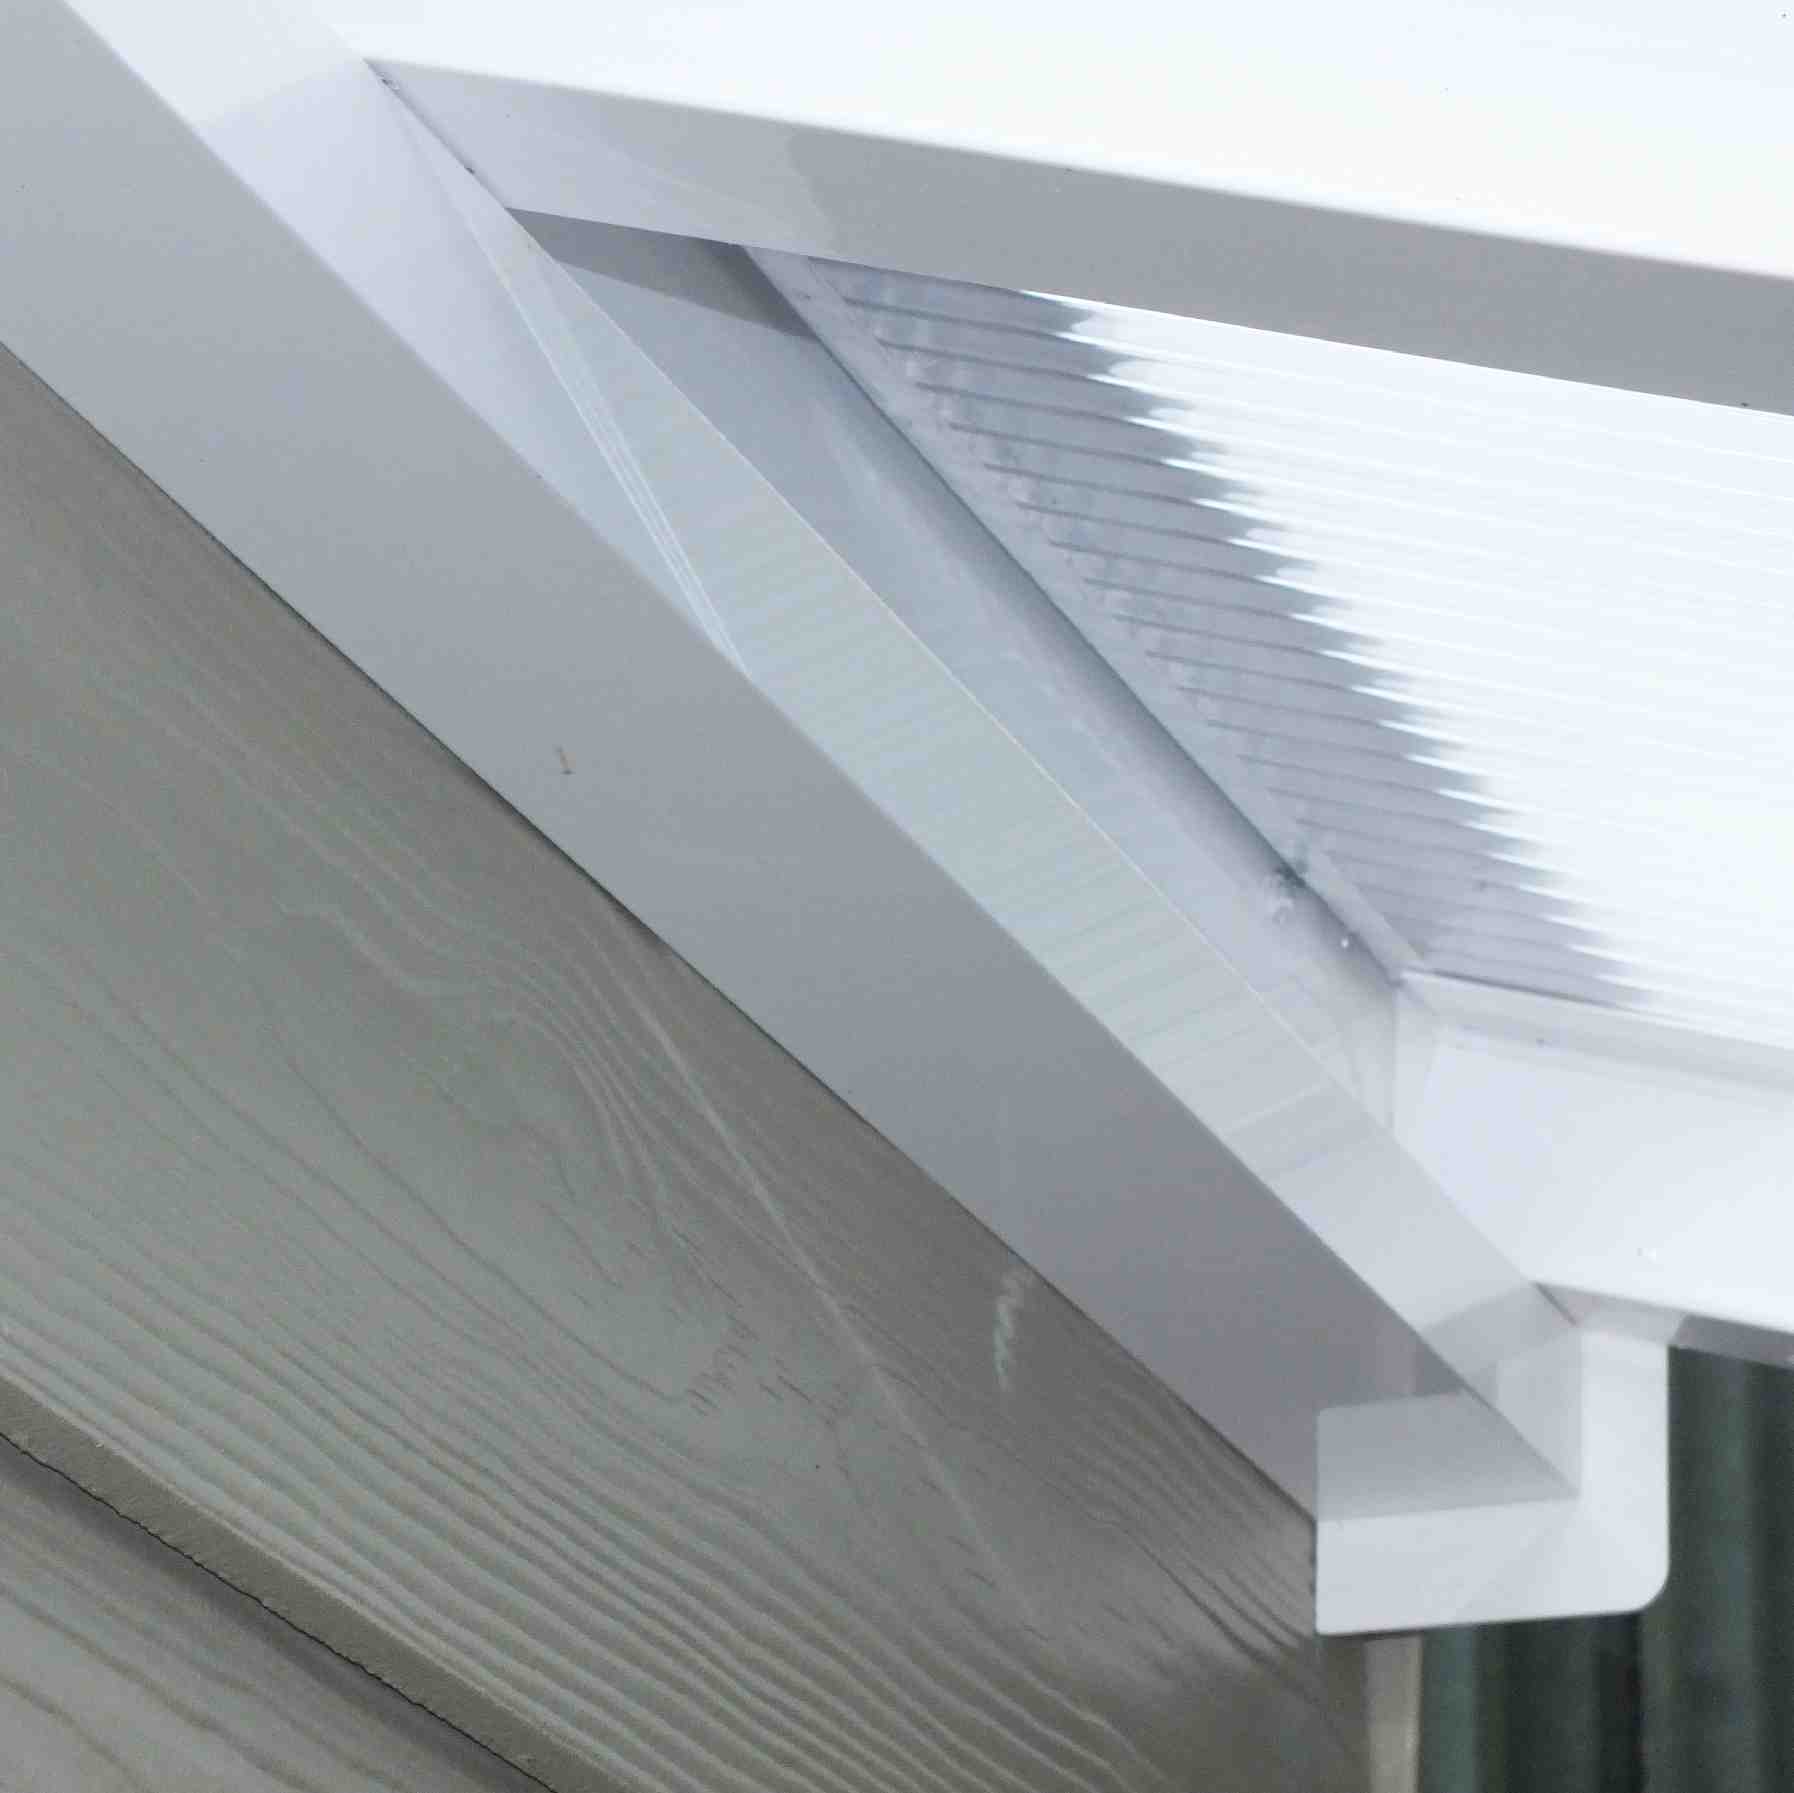 Great deals on Omega Verandah White with 16mm Polycarbonate Glazing - 6.3m (W) x 3.5m (P), (4) Supporting Posts